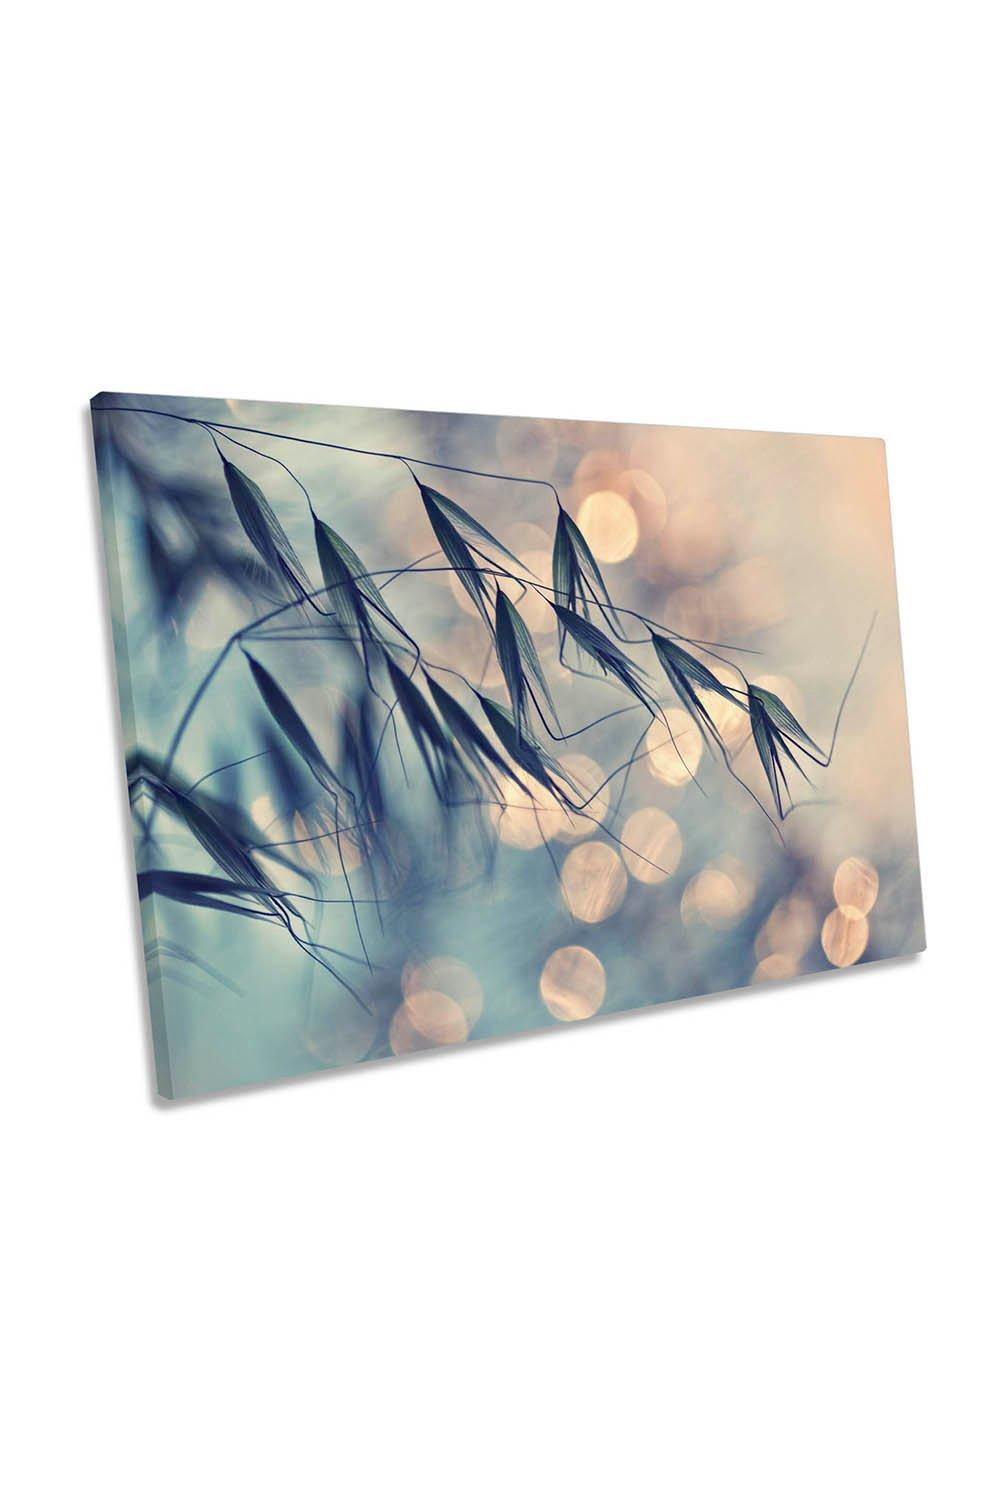 Straw Grass Floral Sunlight Beige Canvas Wall Art Picture Print